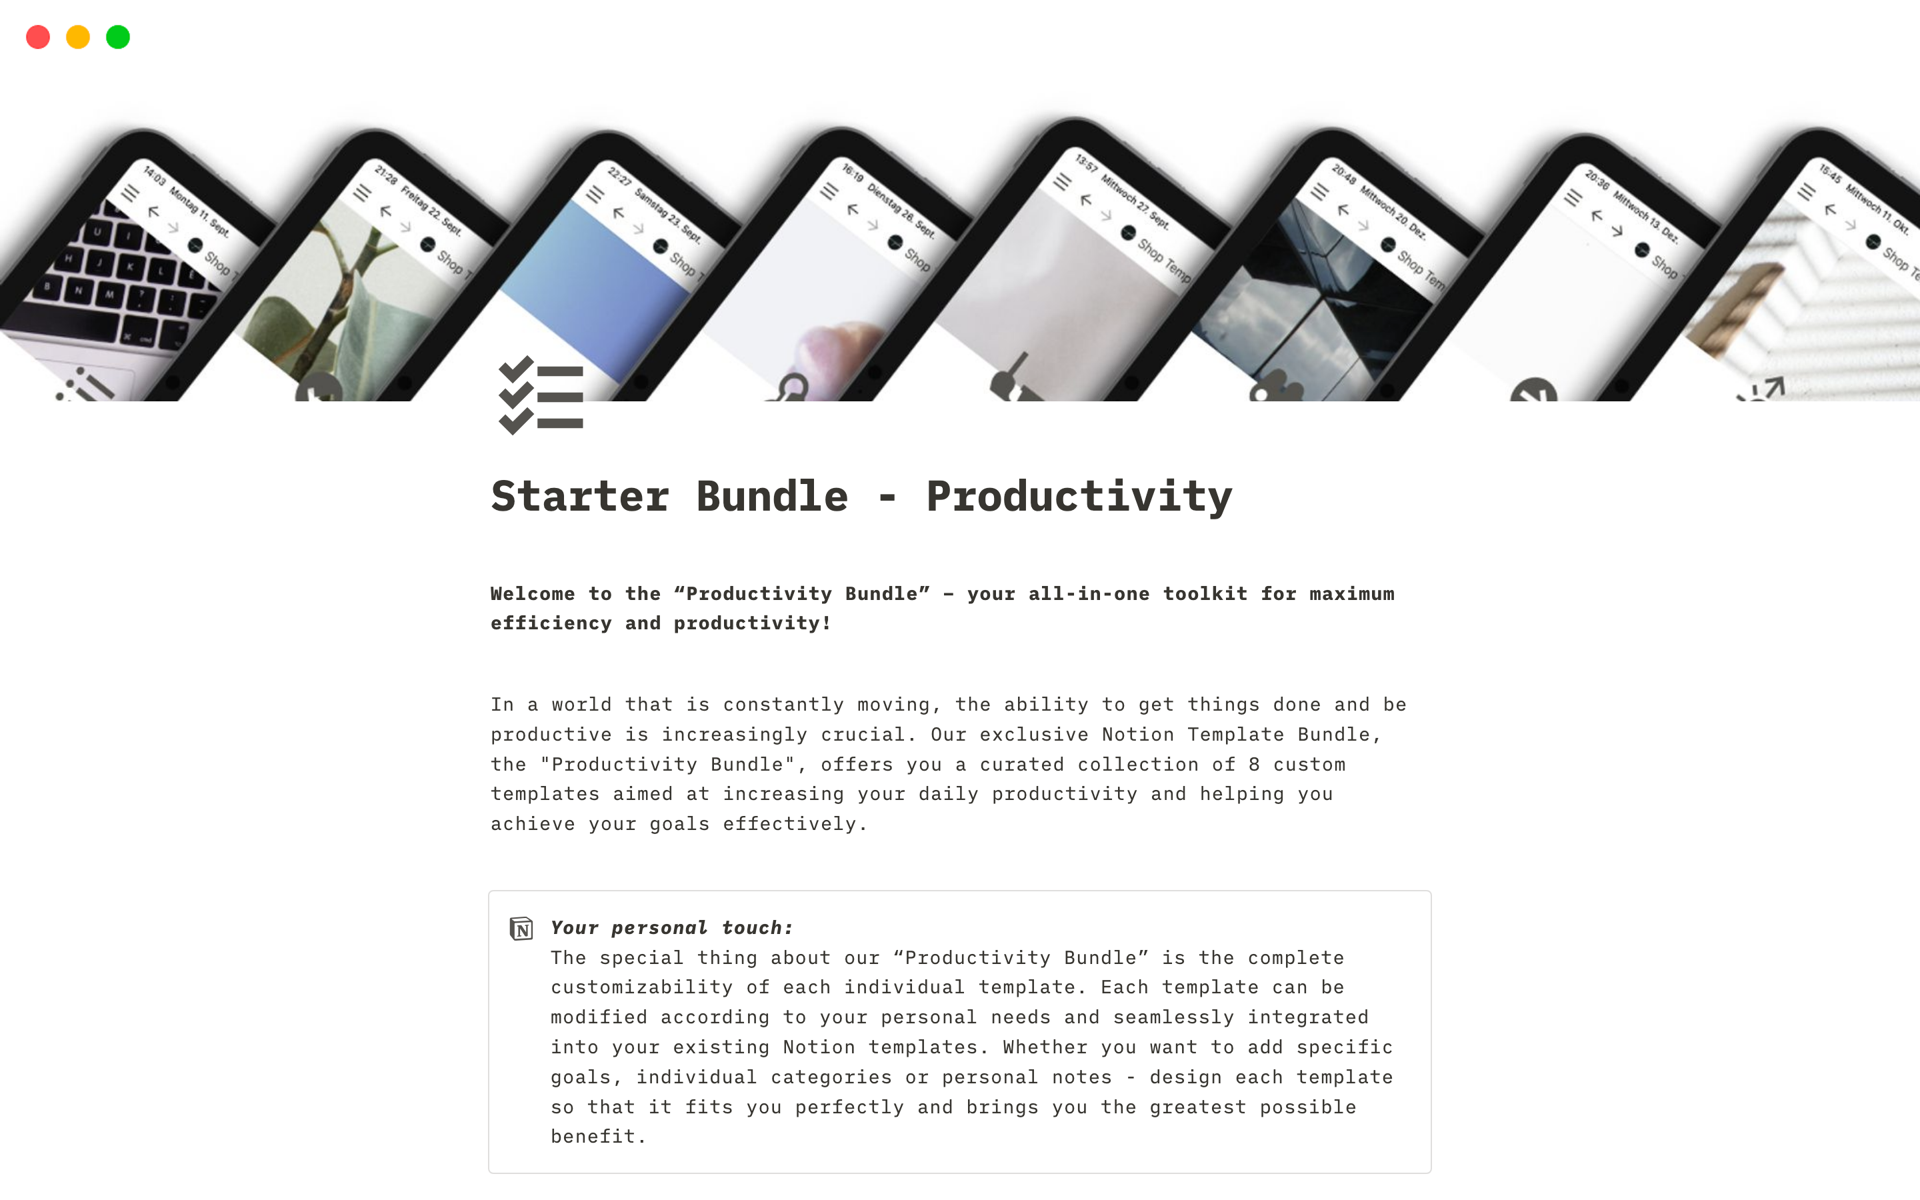 Optimize your productivity with the “Starter Bundle – Productivity” – an exclusive bundle of 8 customizable Notion templates designed to increase your efficiency and achieve your goals.